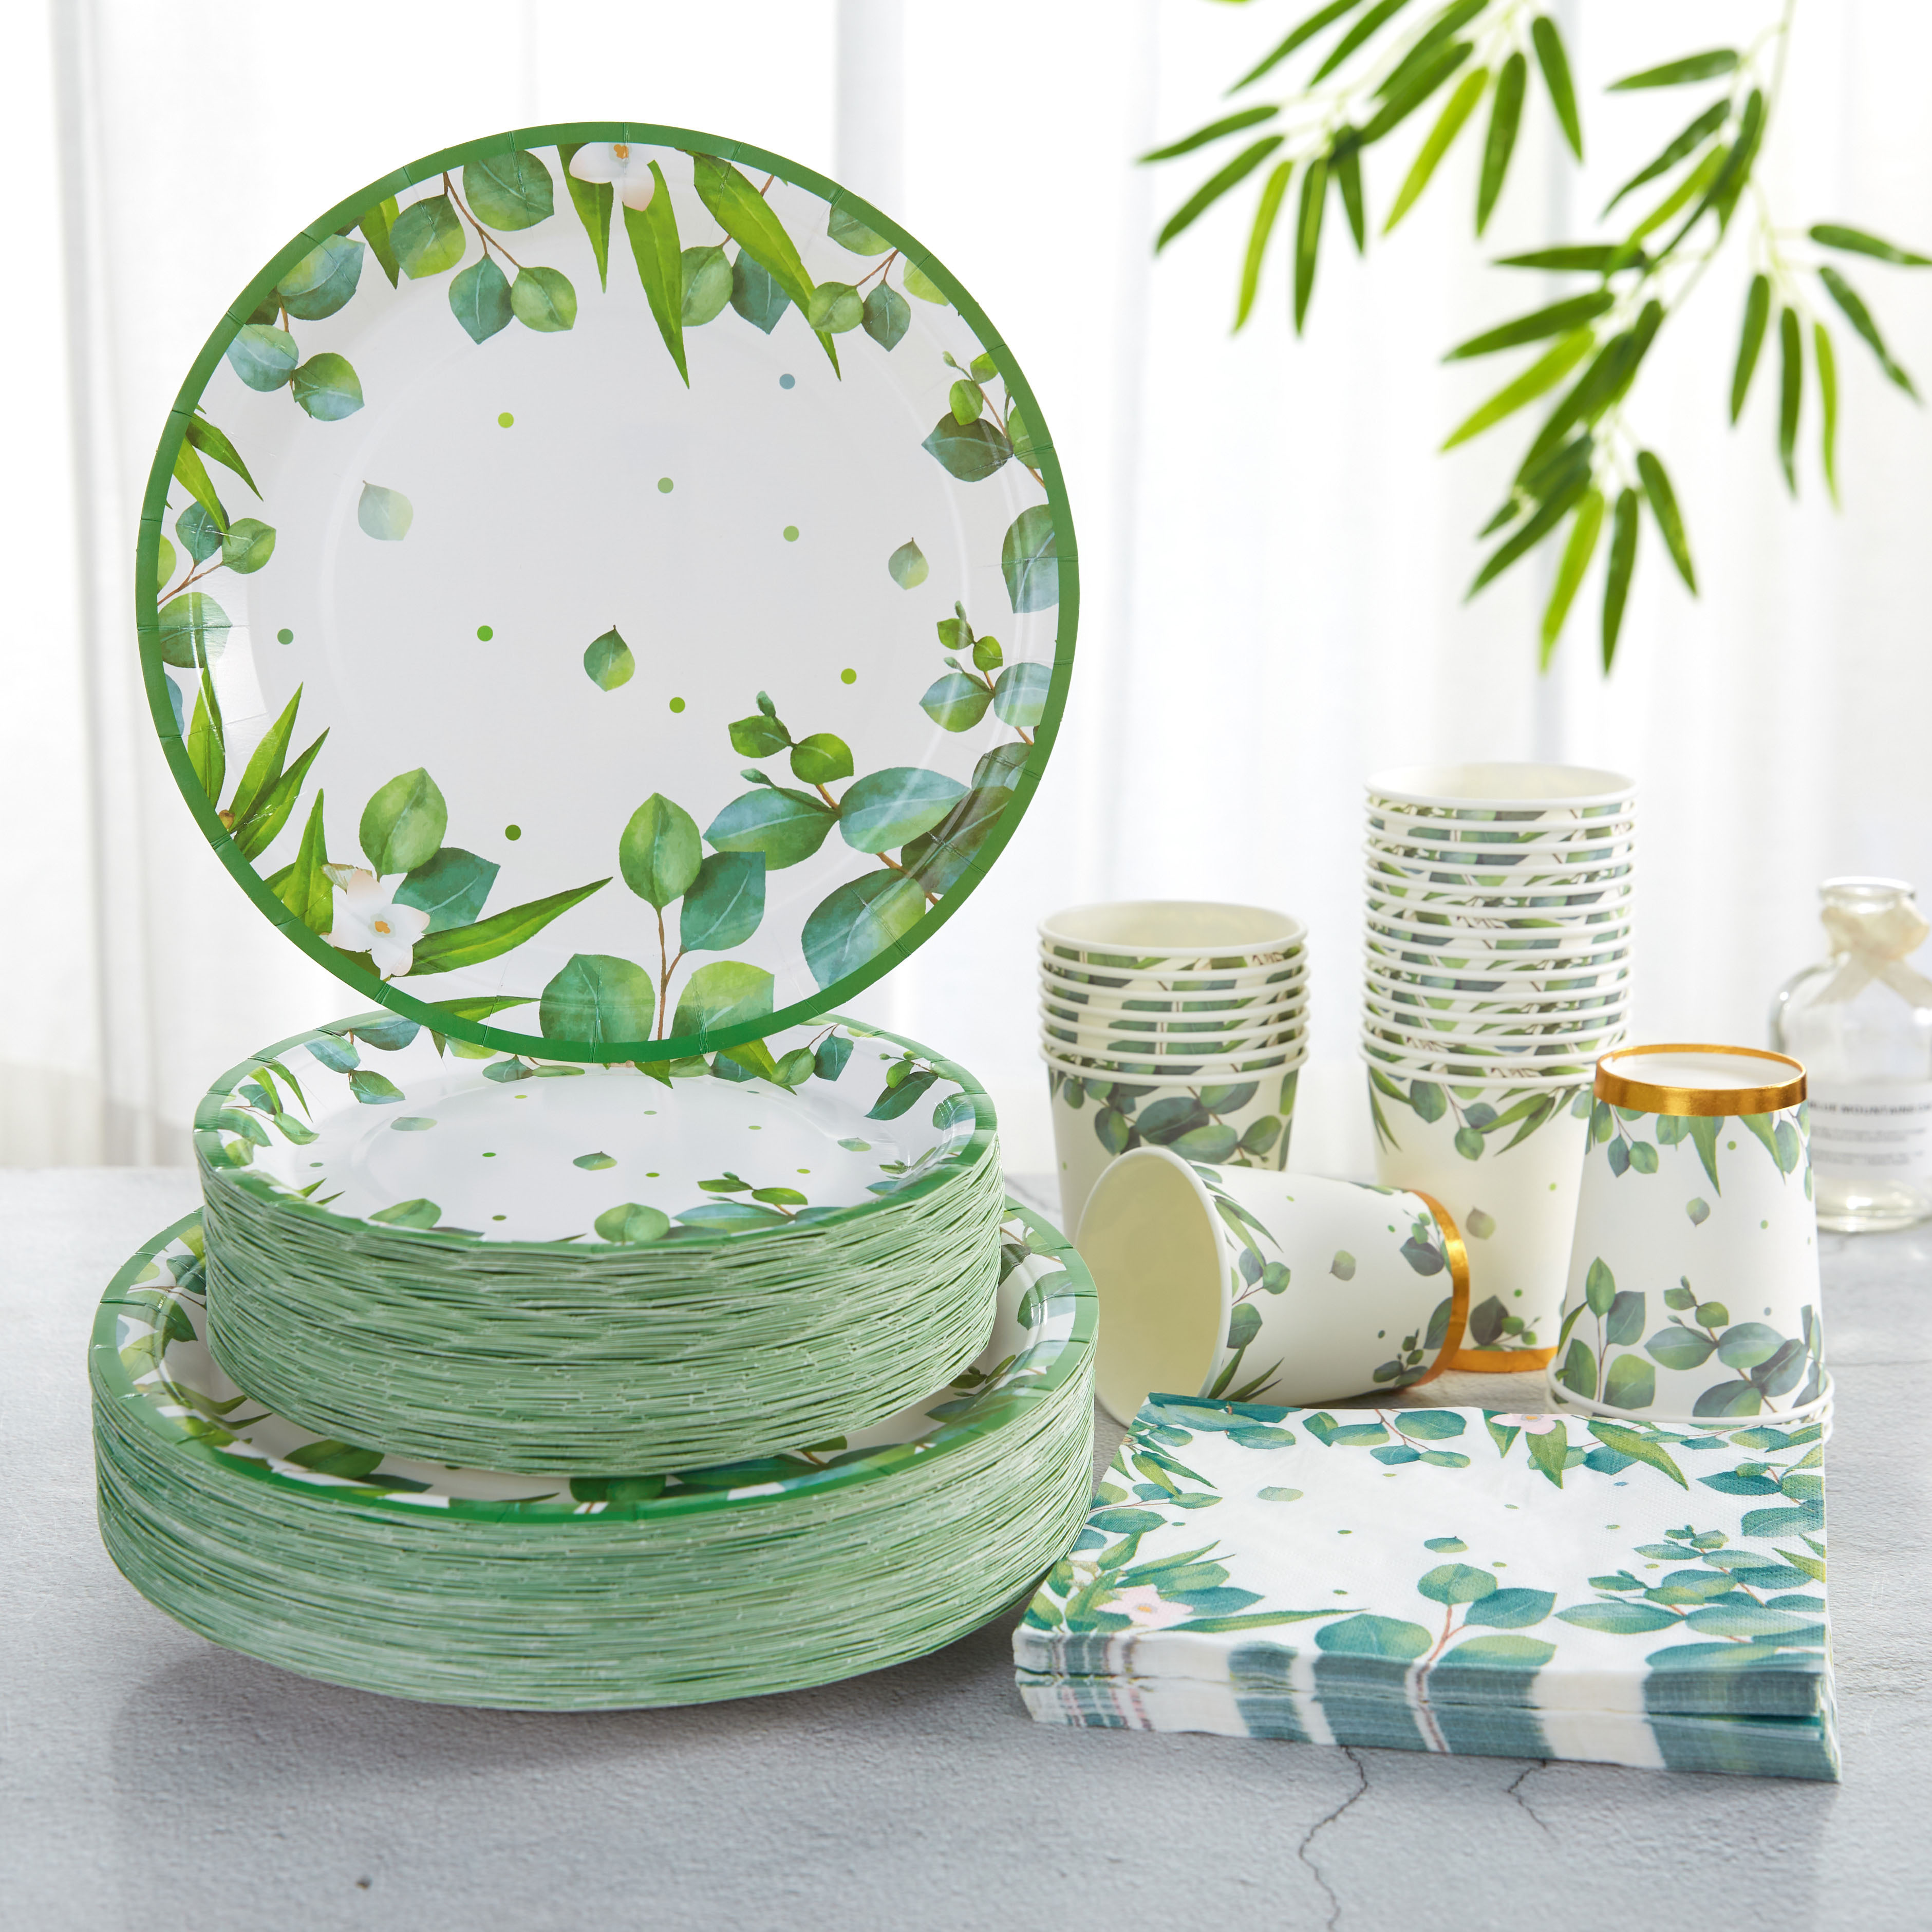 

Green Leaf Party Supplies Set - 96pcs Disposable Paper Plates, Cups, Napkins For Bridal Shower, Eucalyptus & Sage Green Birthday Decorations, Event & Party Tableware Kit